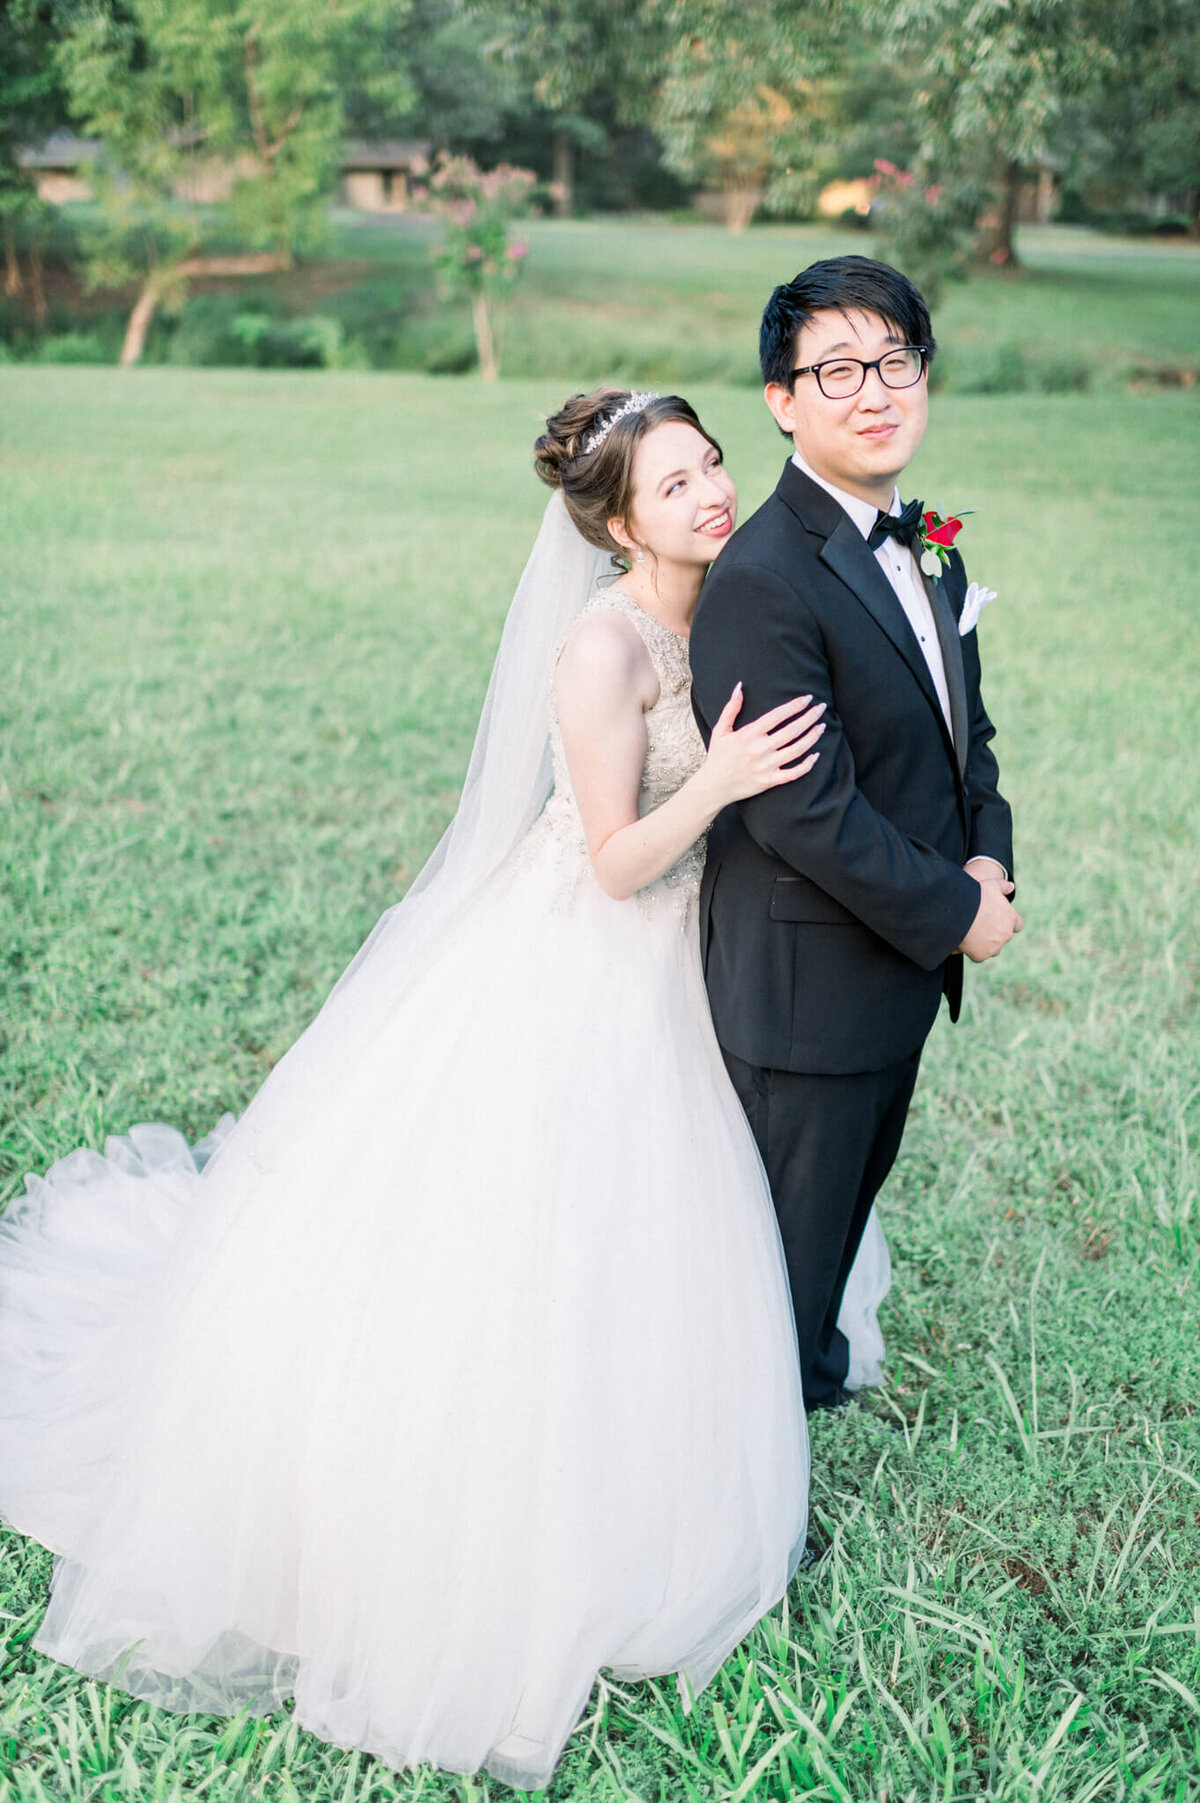 woman with crown and large white gown poses with her new husband in open field